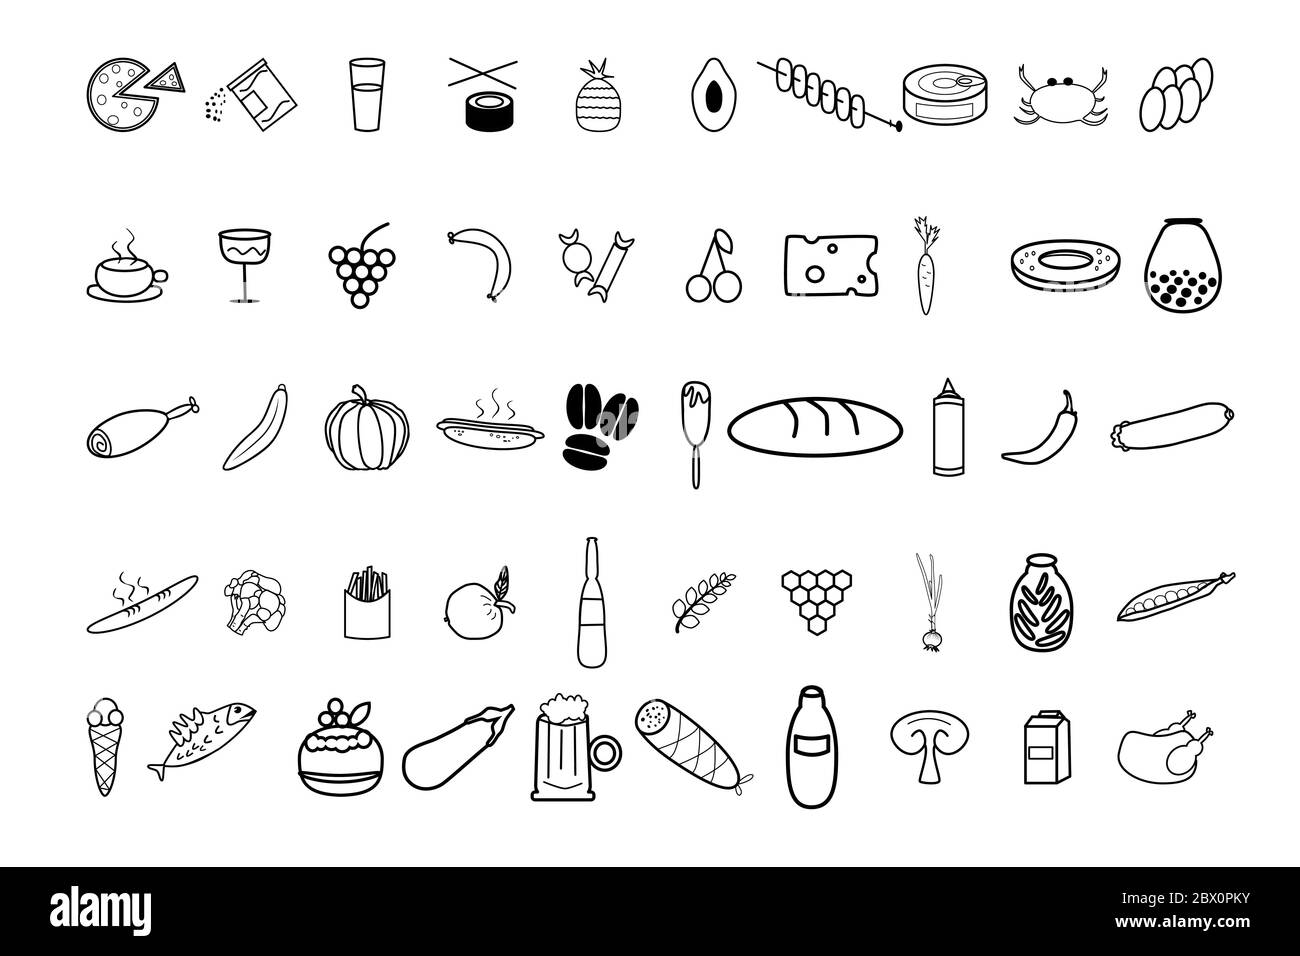 Food and cooking icon line big set. Minimalist vector symbols for mobile, applications and packing design. Collection of stroke food and drinks sign Stock Vector